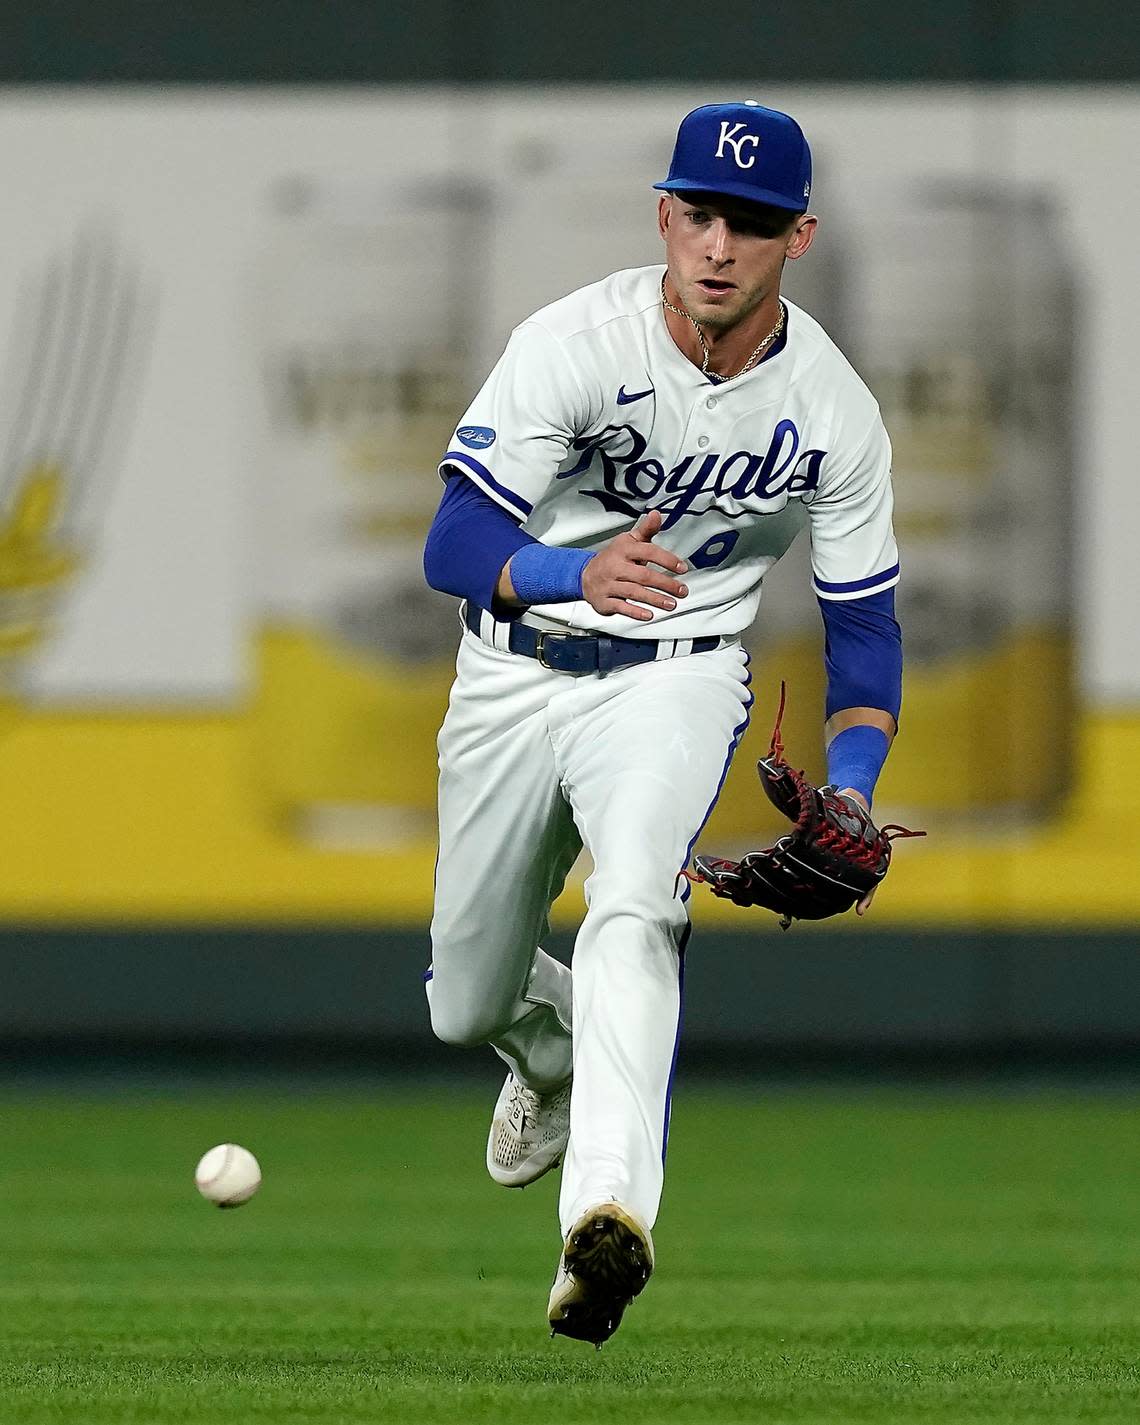 Kansas City Royals center fielder Drew Waters chases a RBI single hit by Cleveland Guardians’ Owen Miller during the fourth inning of a baseball game Wednesday, Sept. 7, 2022, in Kansas City, Mo. (AP Photo/Charlie Riedel)